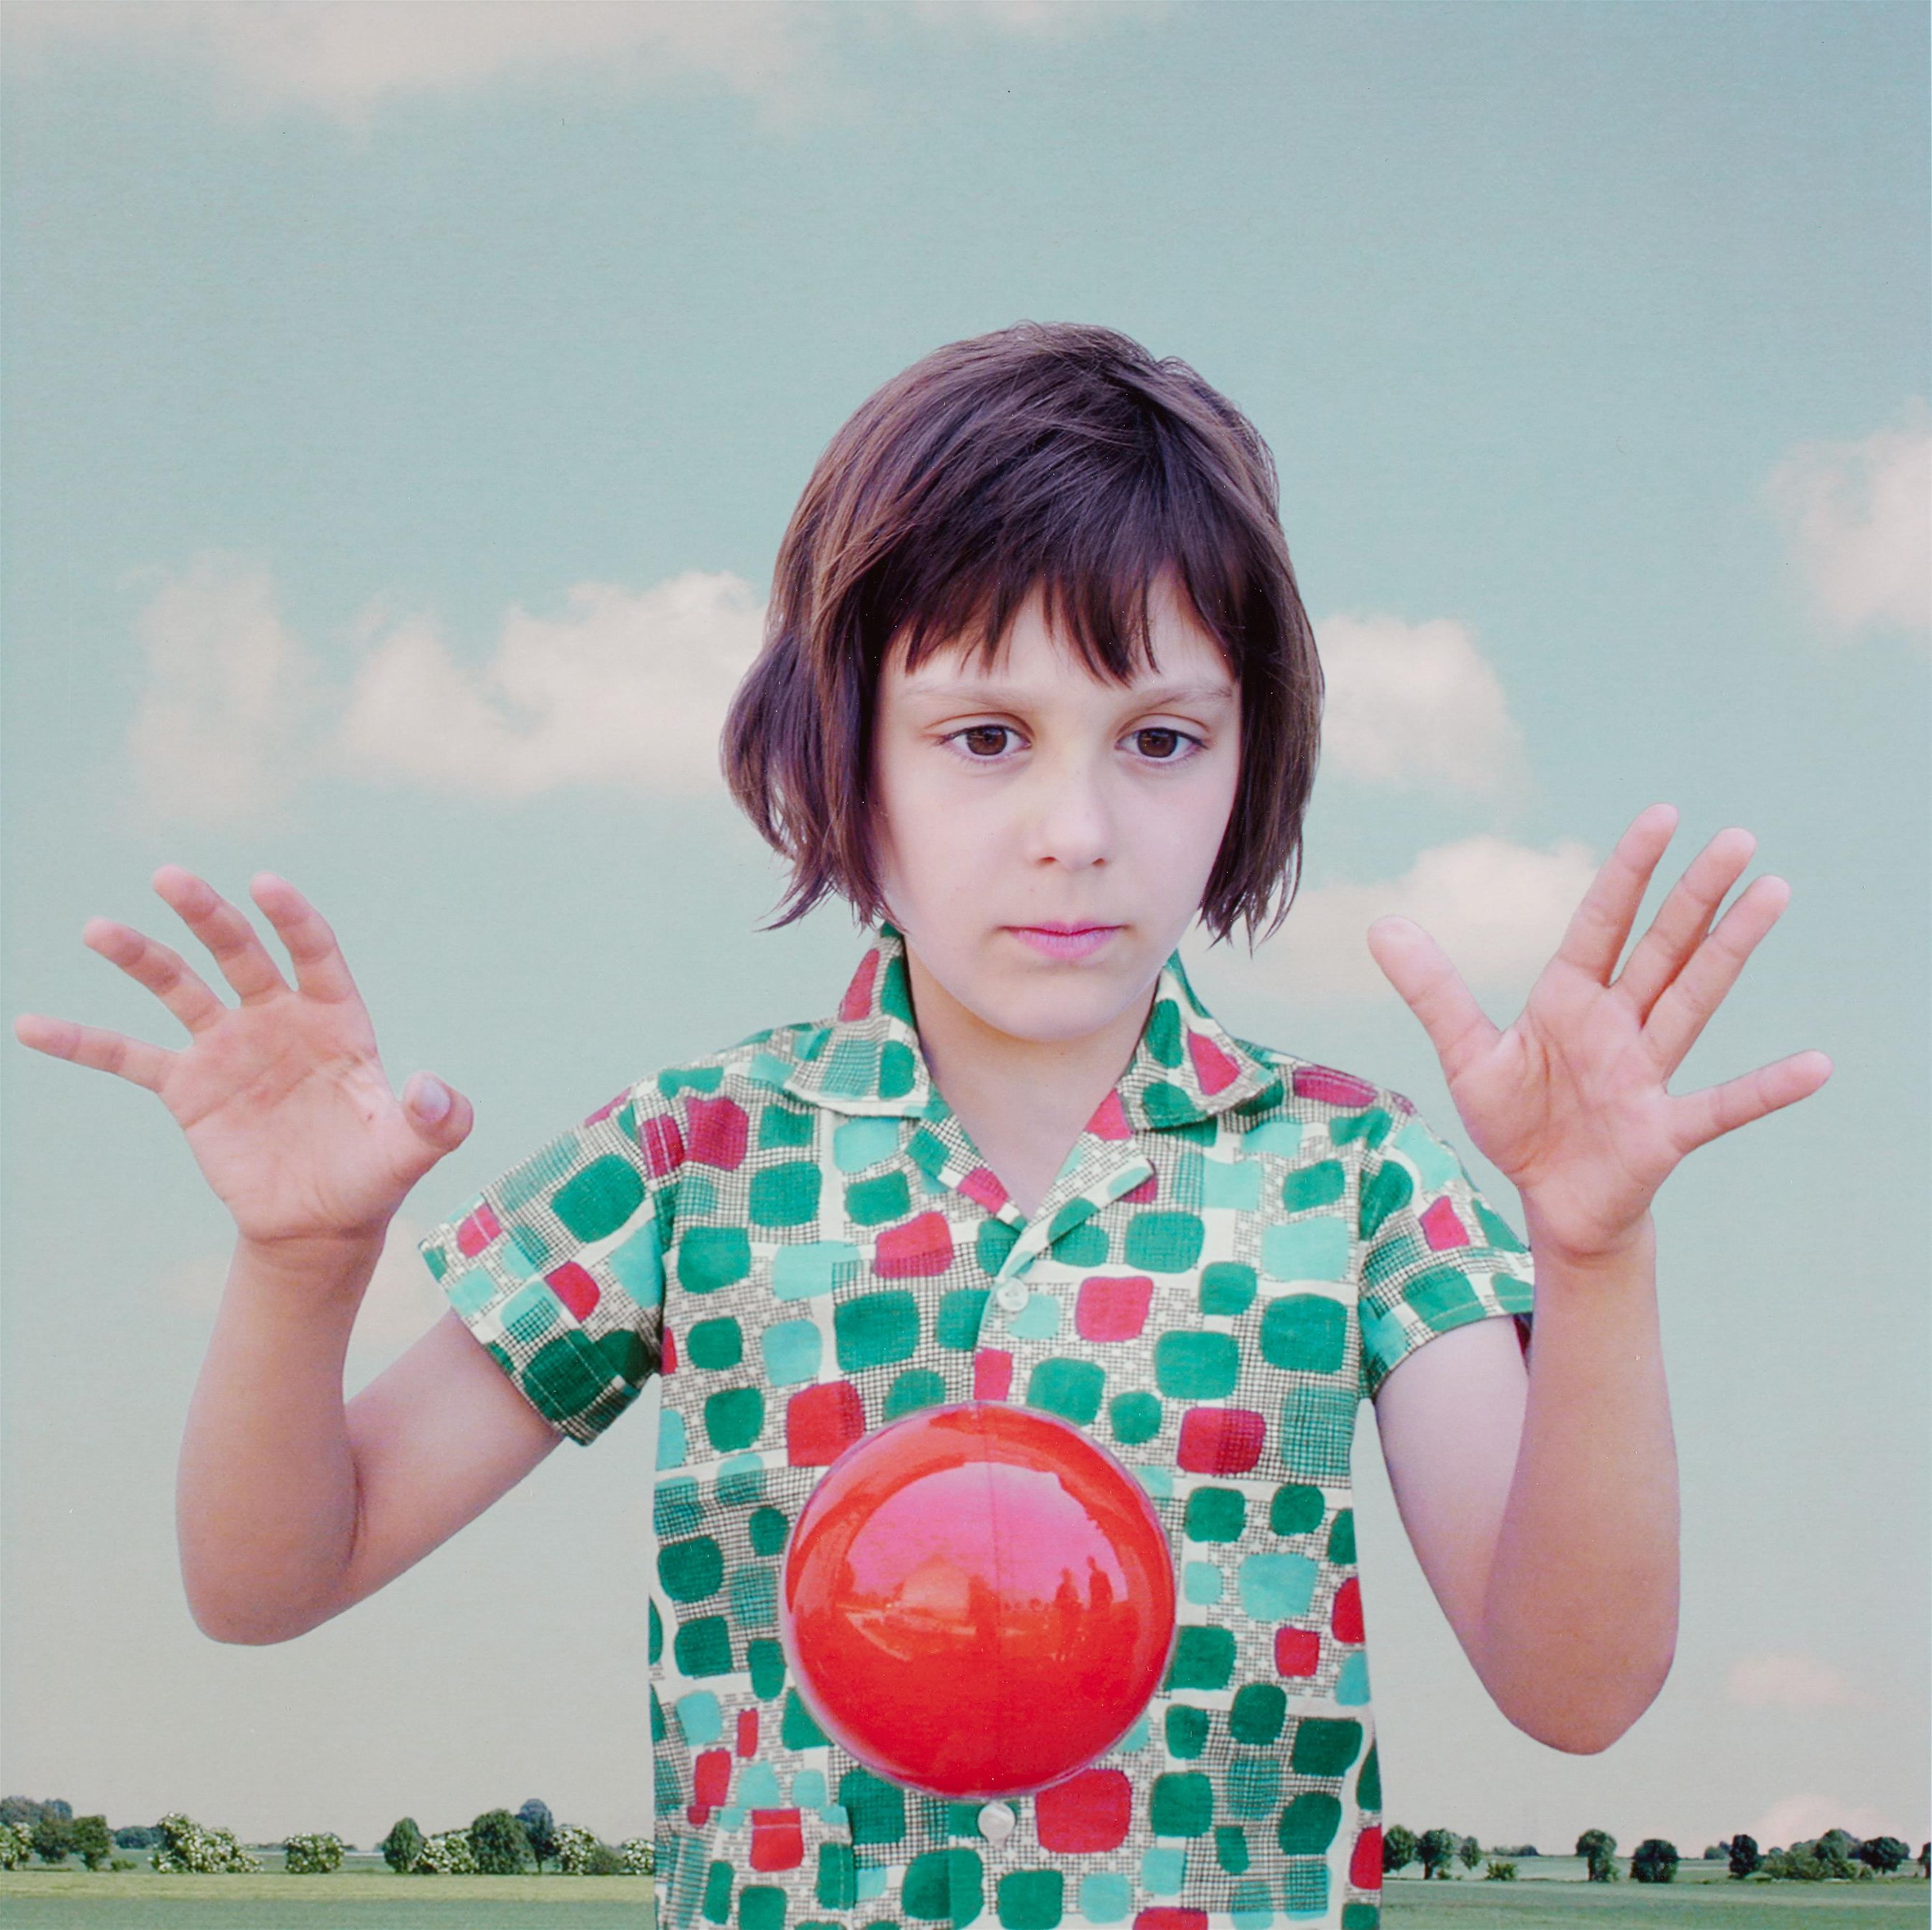 Loretta Lux - The Red Ball 1 - image-1